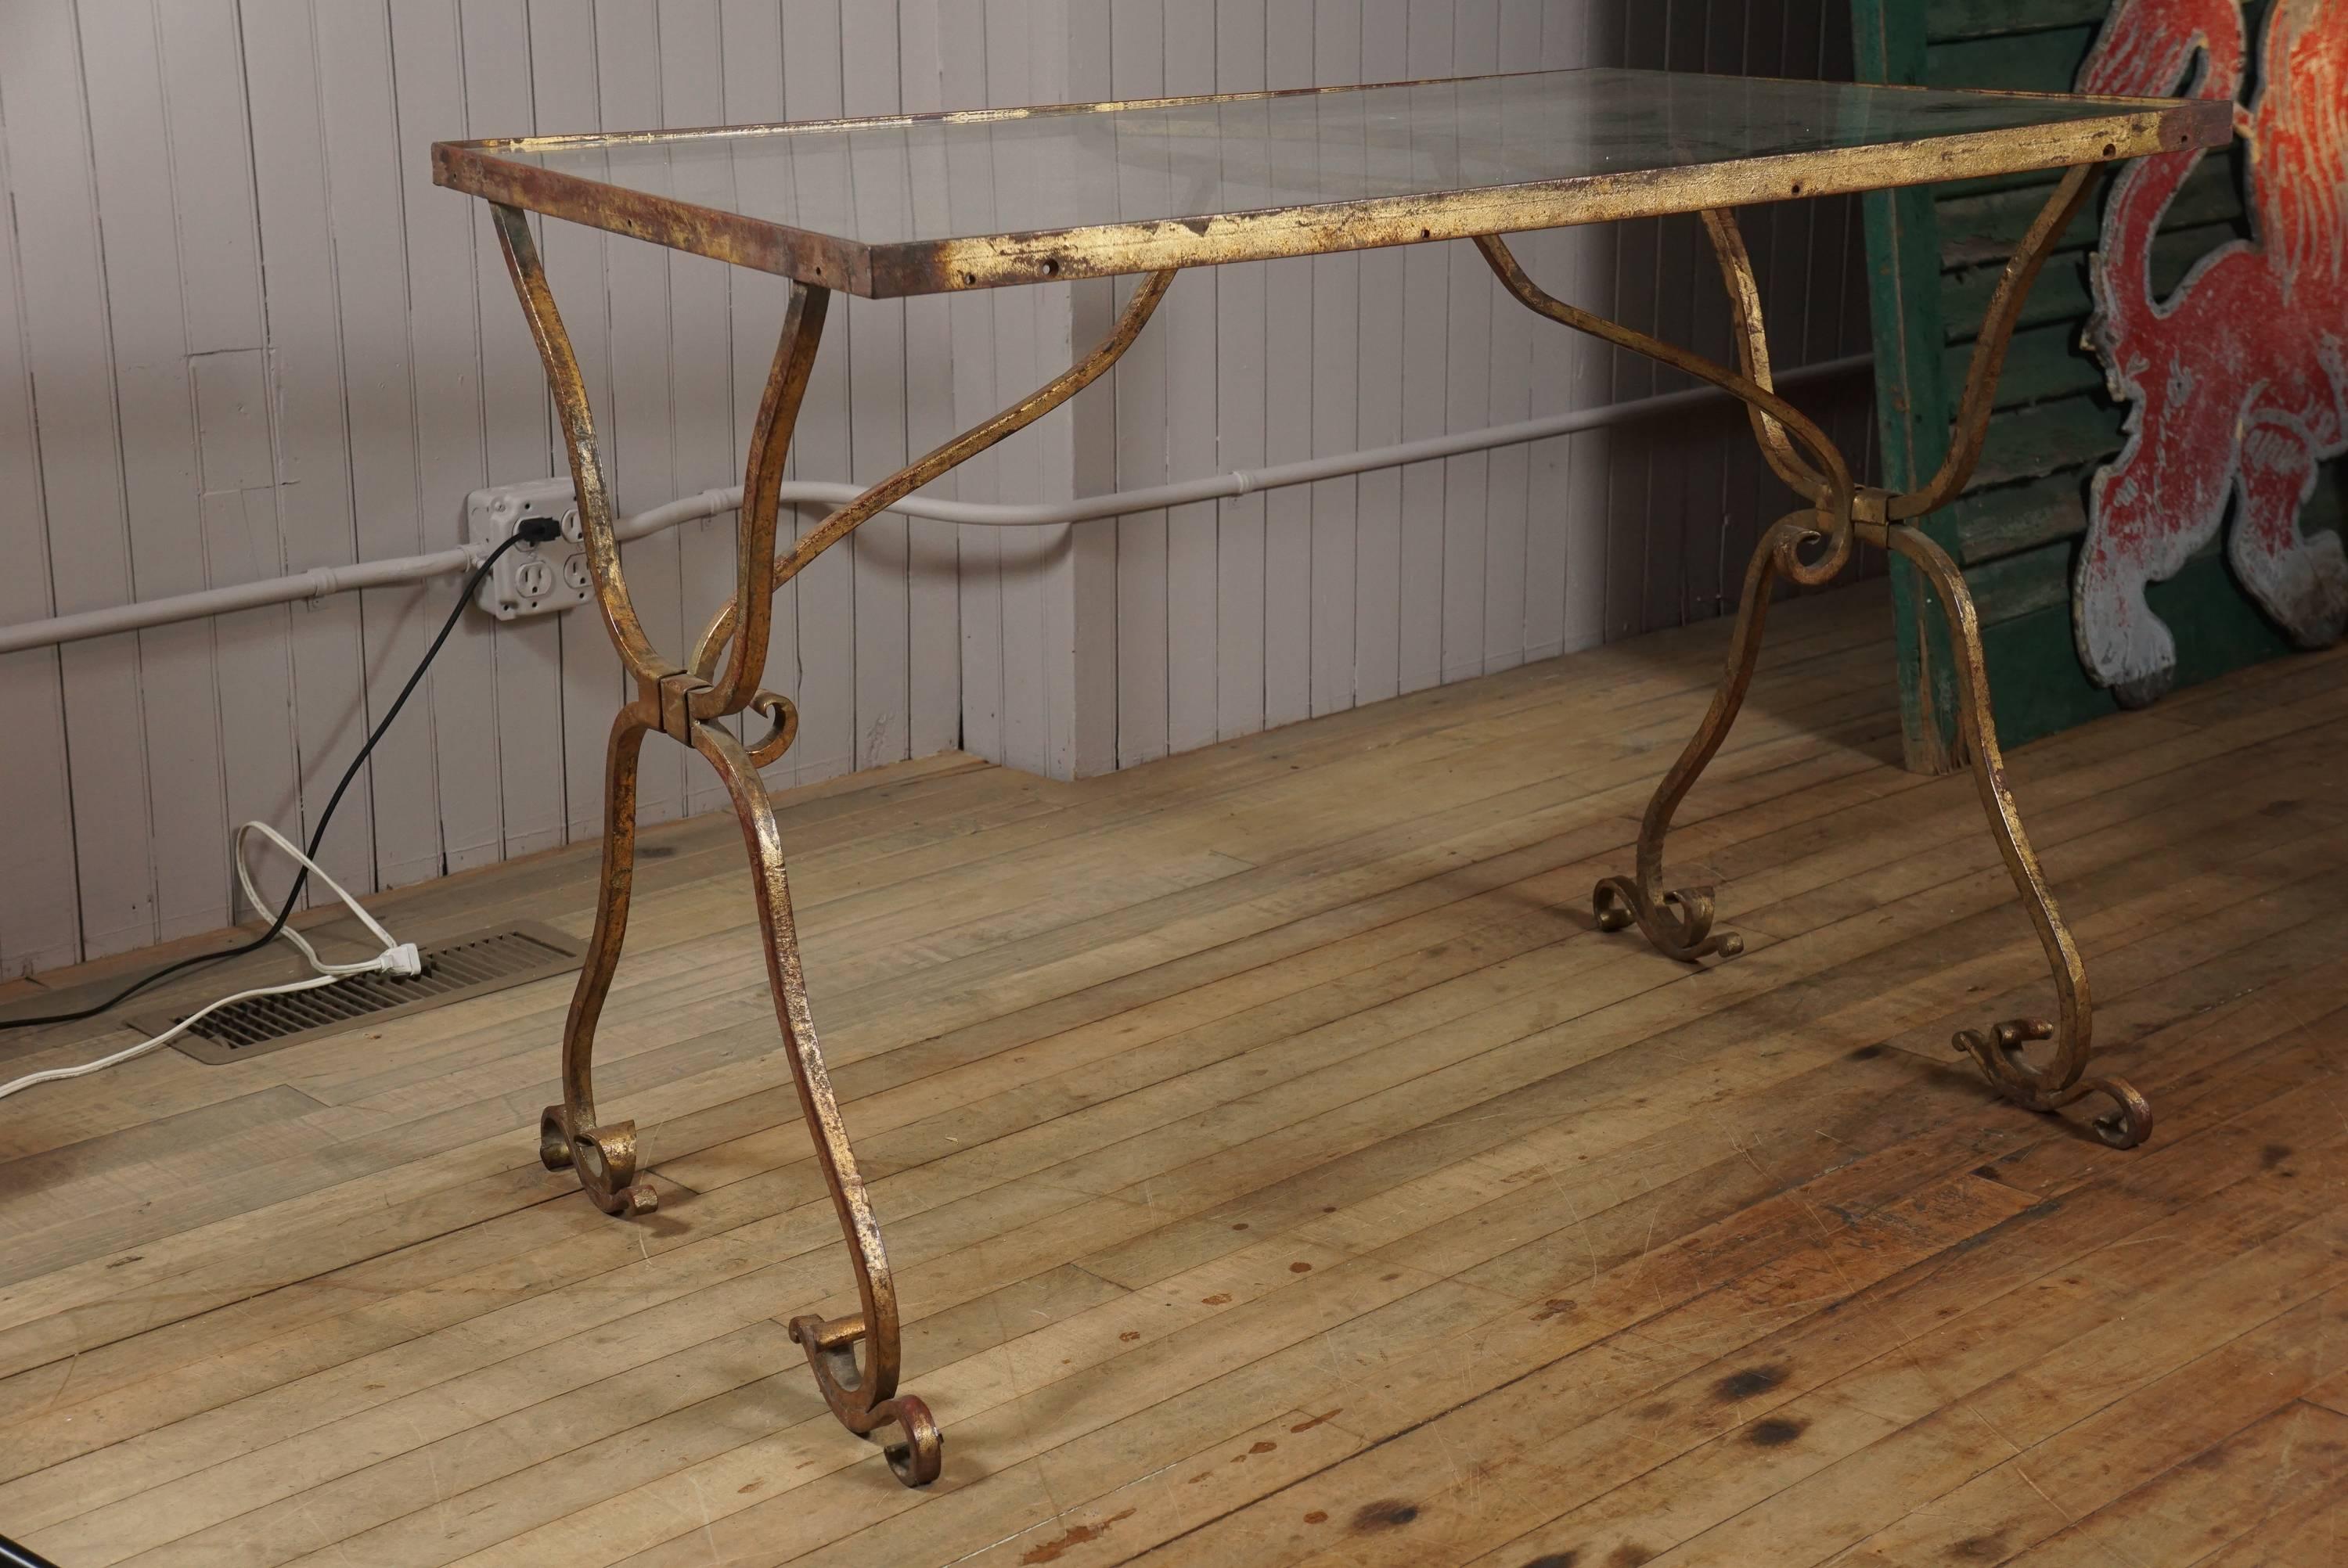 Artistically hand-wrought iron side table with great detail and flourishes, great old gilt patina, new glass top insert.